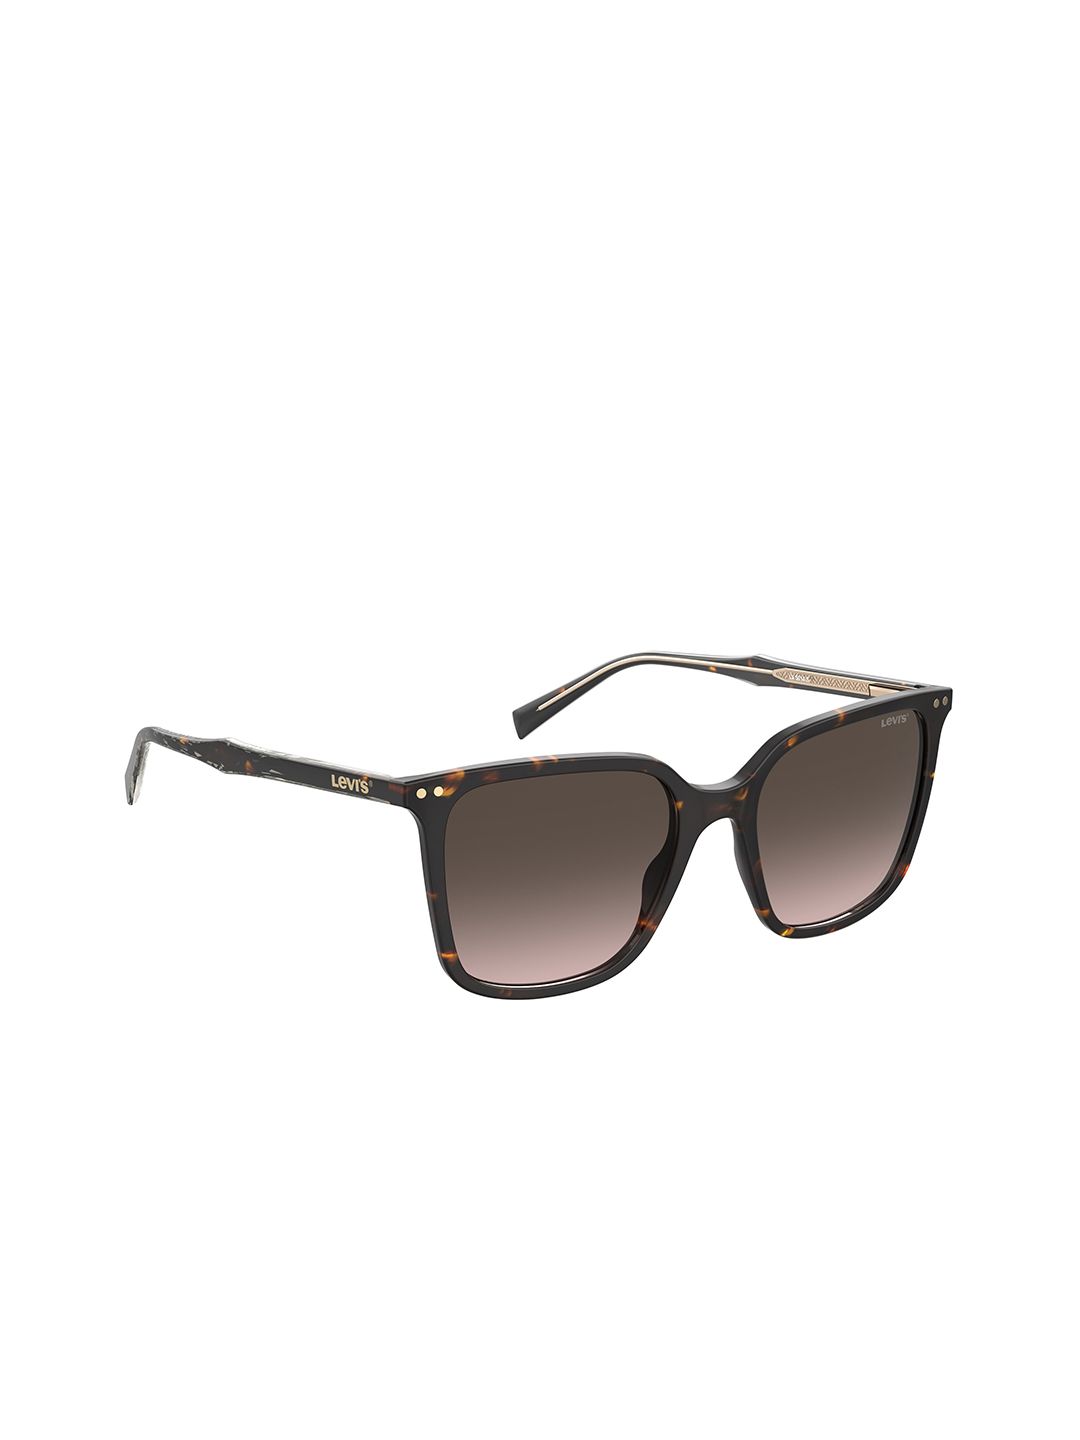 Levis Women Brown Lens & Brown Other Sunglasses with UV Protected Lens Price in India